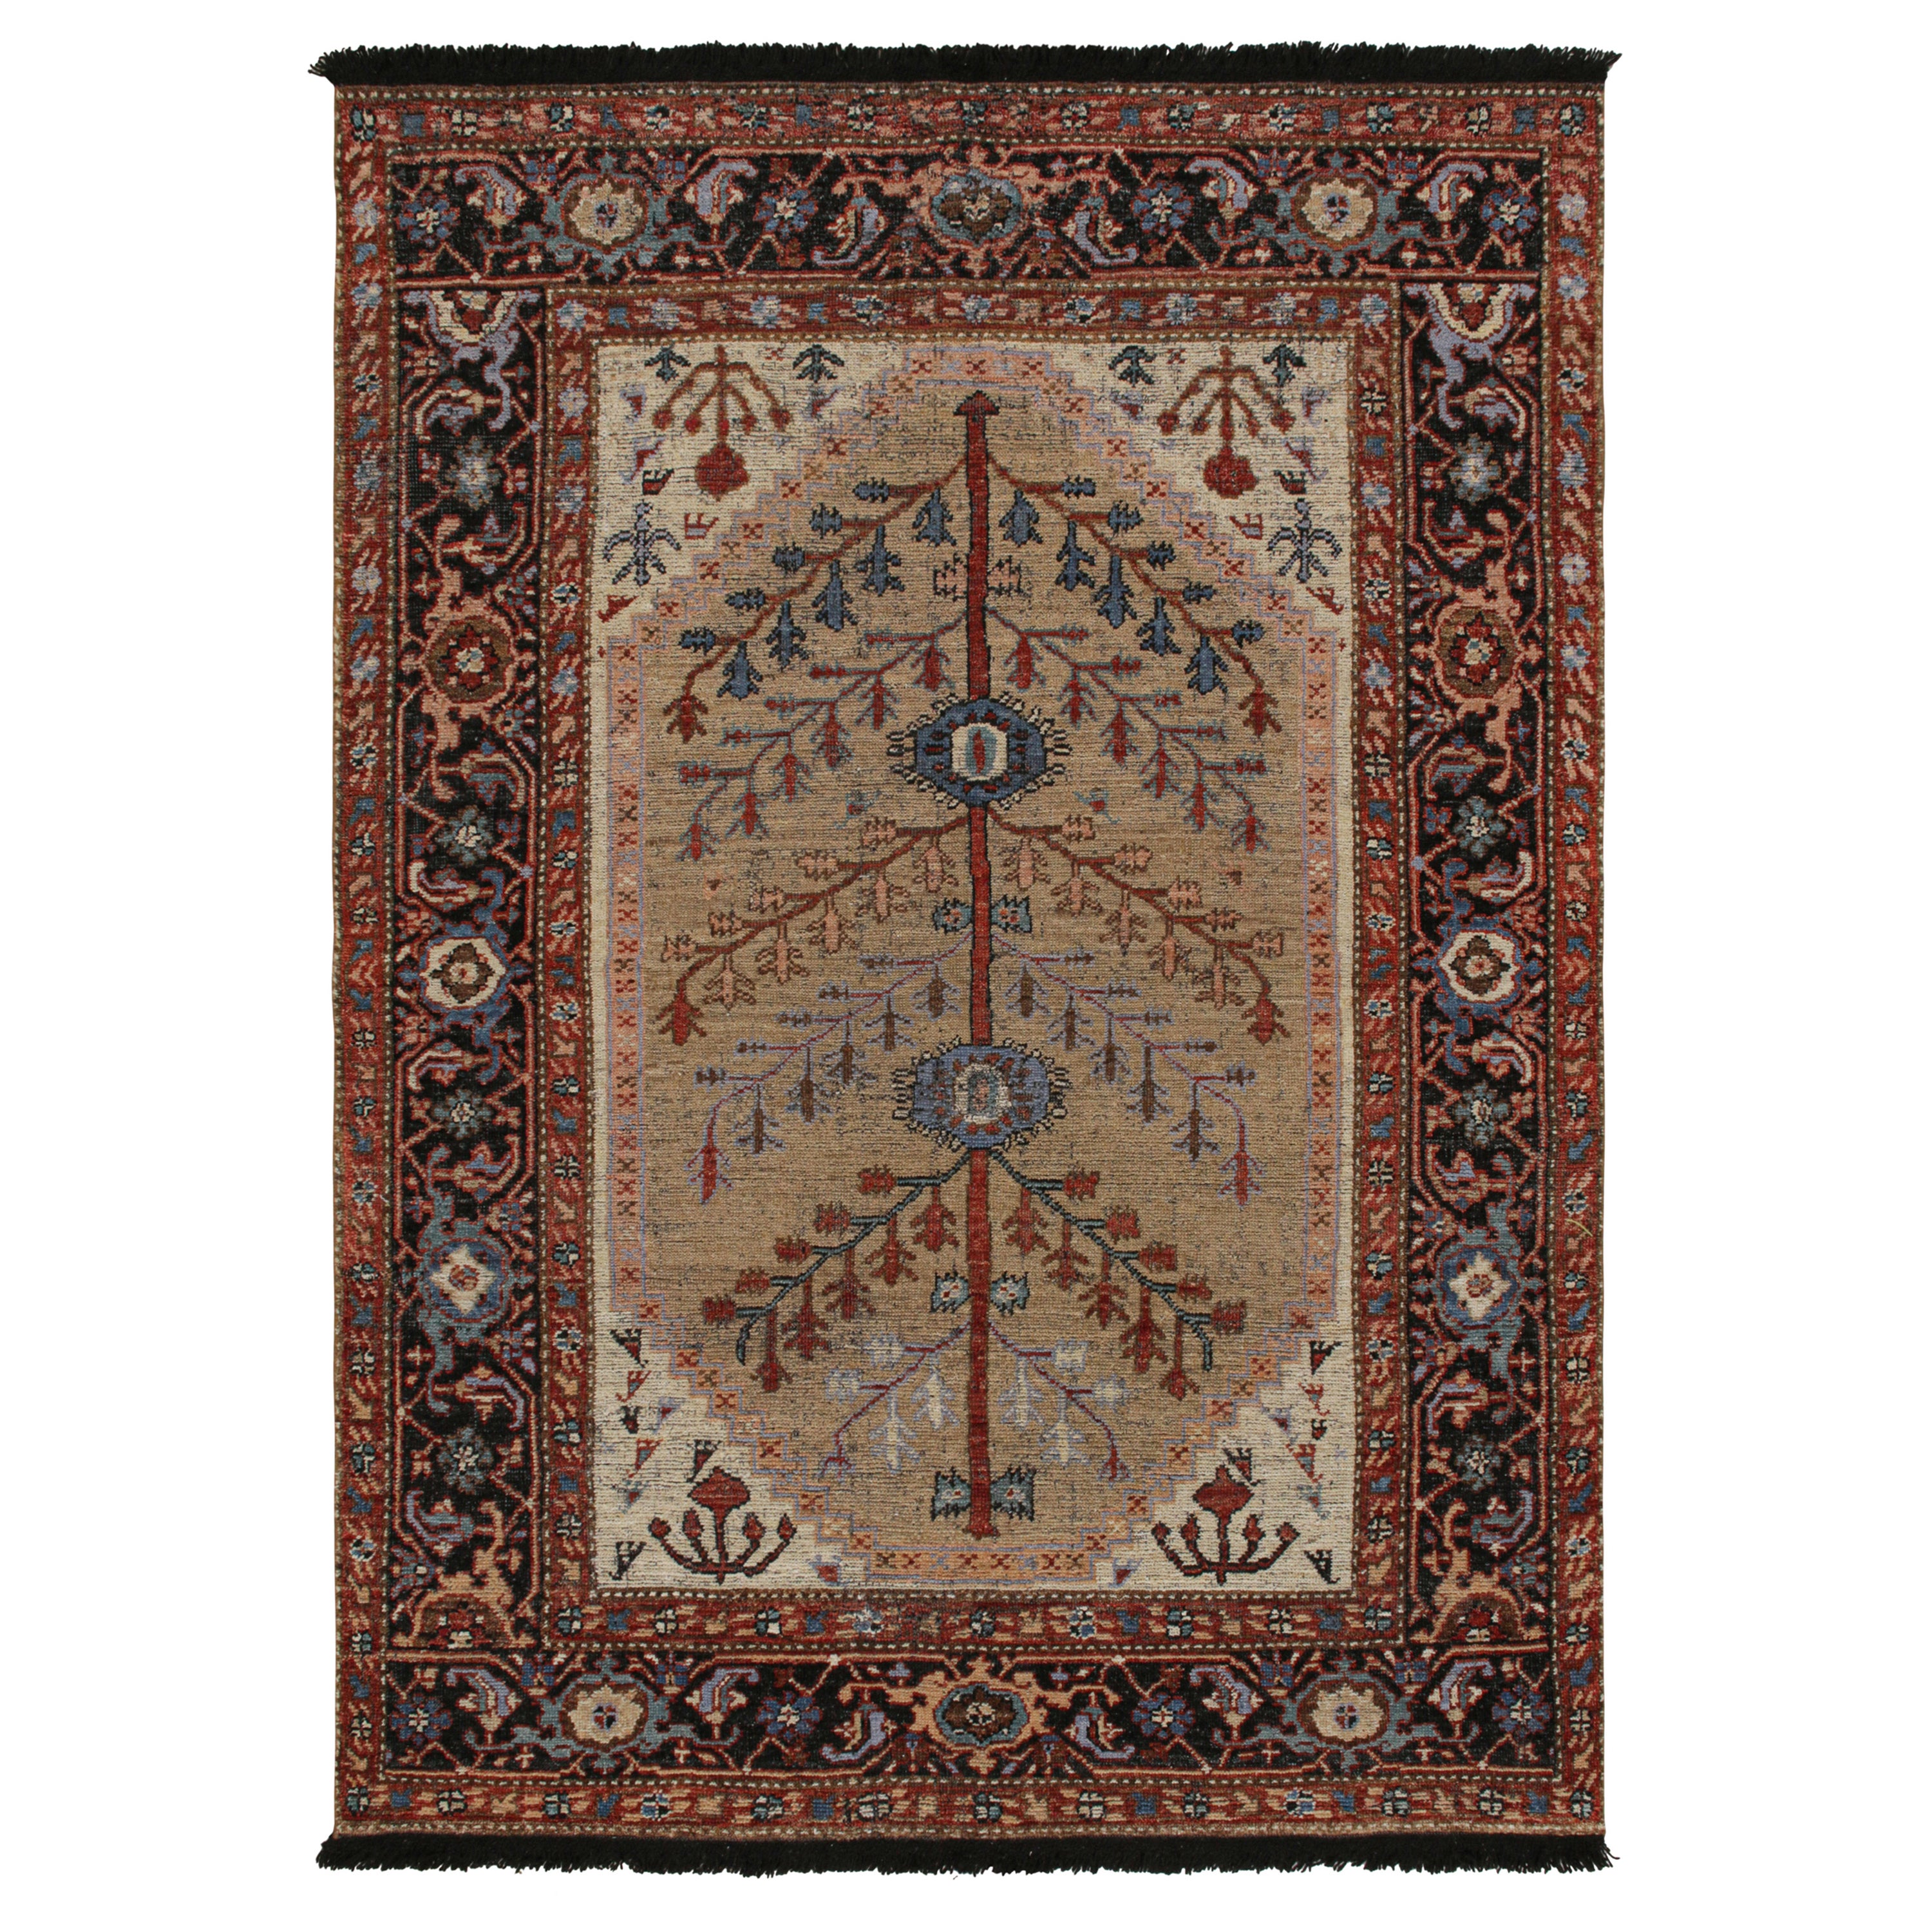 Rug & Kilim’s Antique Tribal Style rug in Red, Blue & Brown Patterns